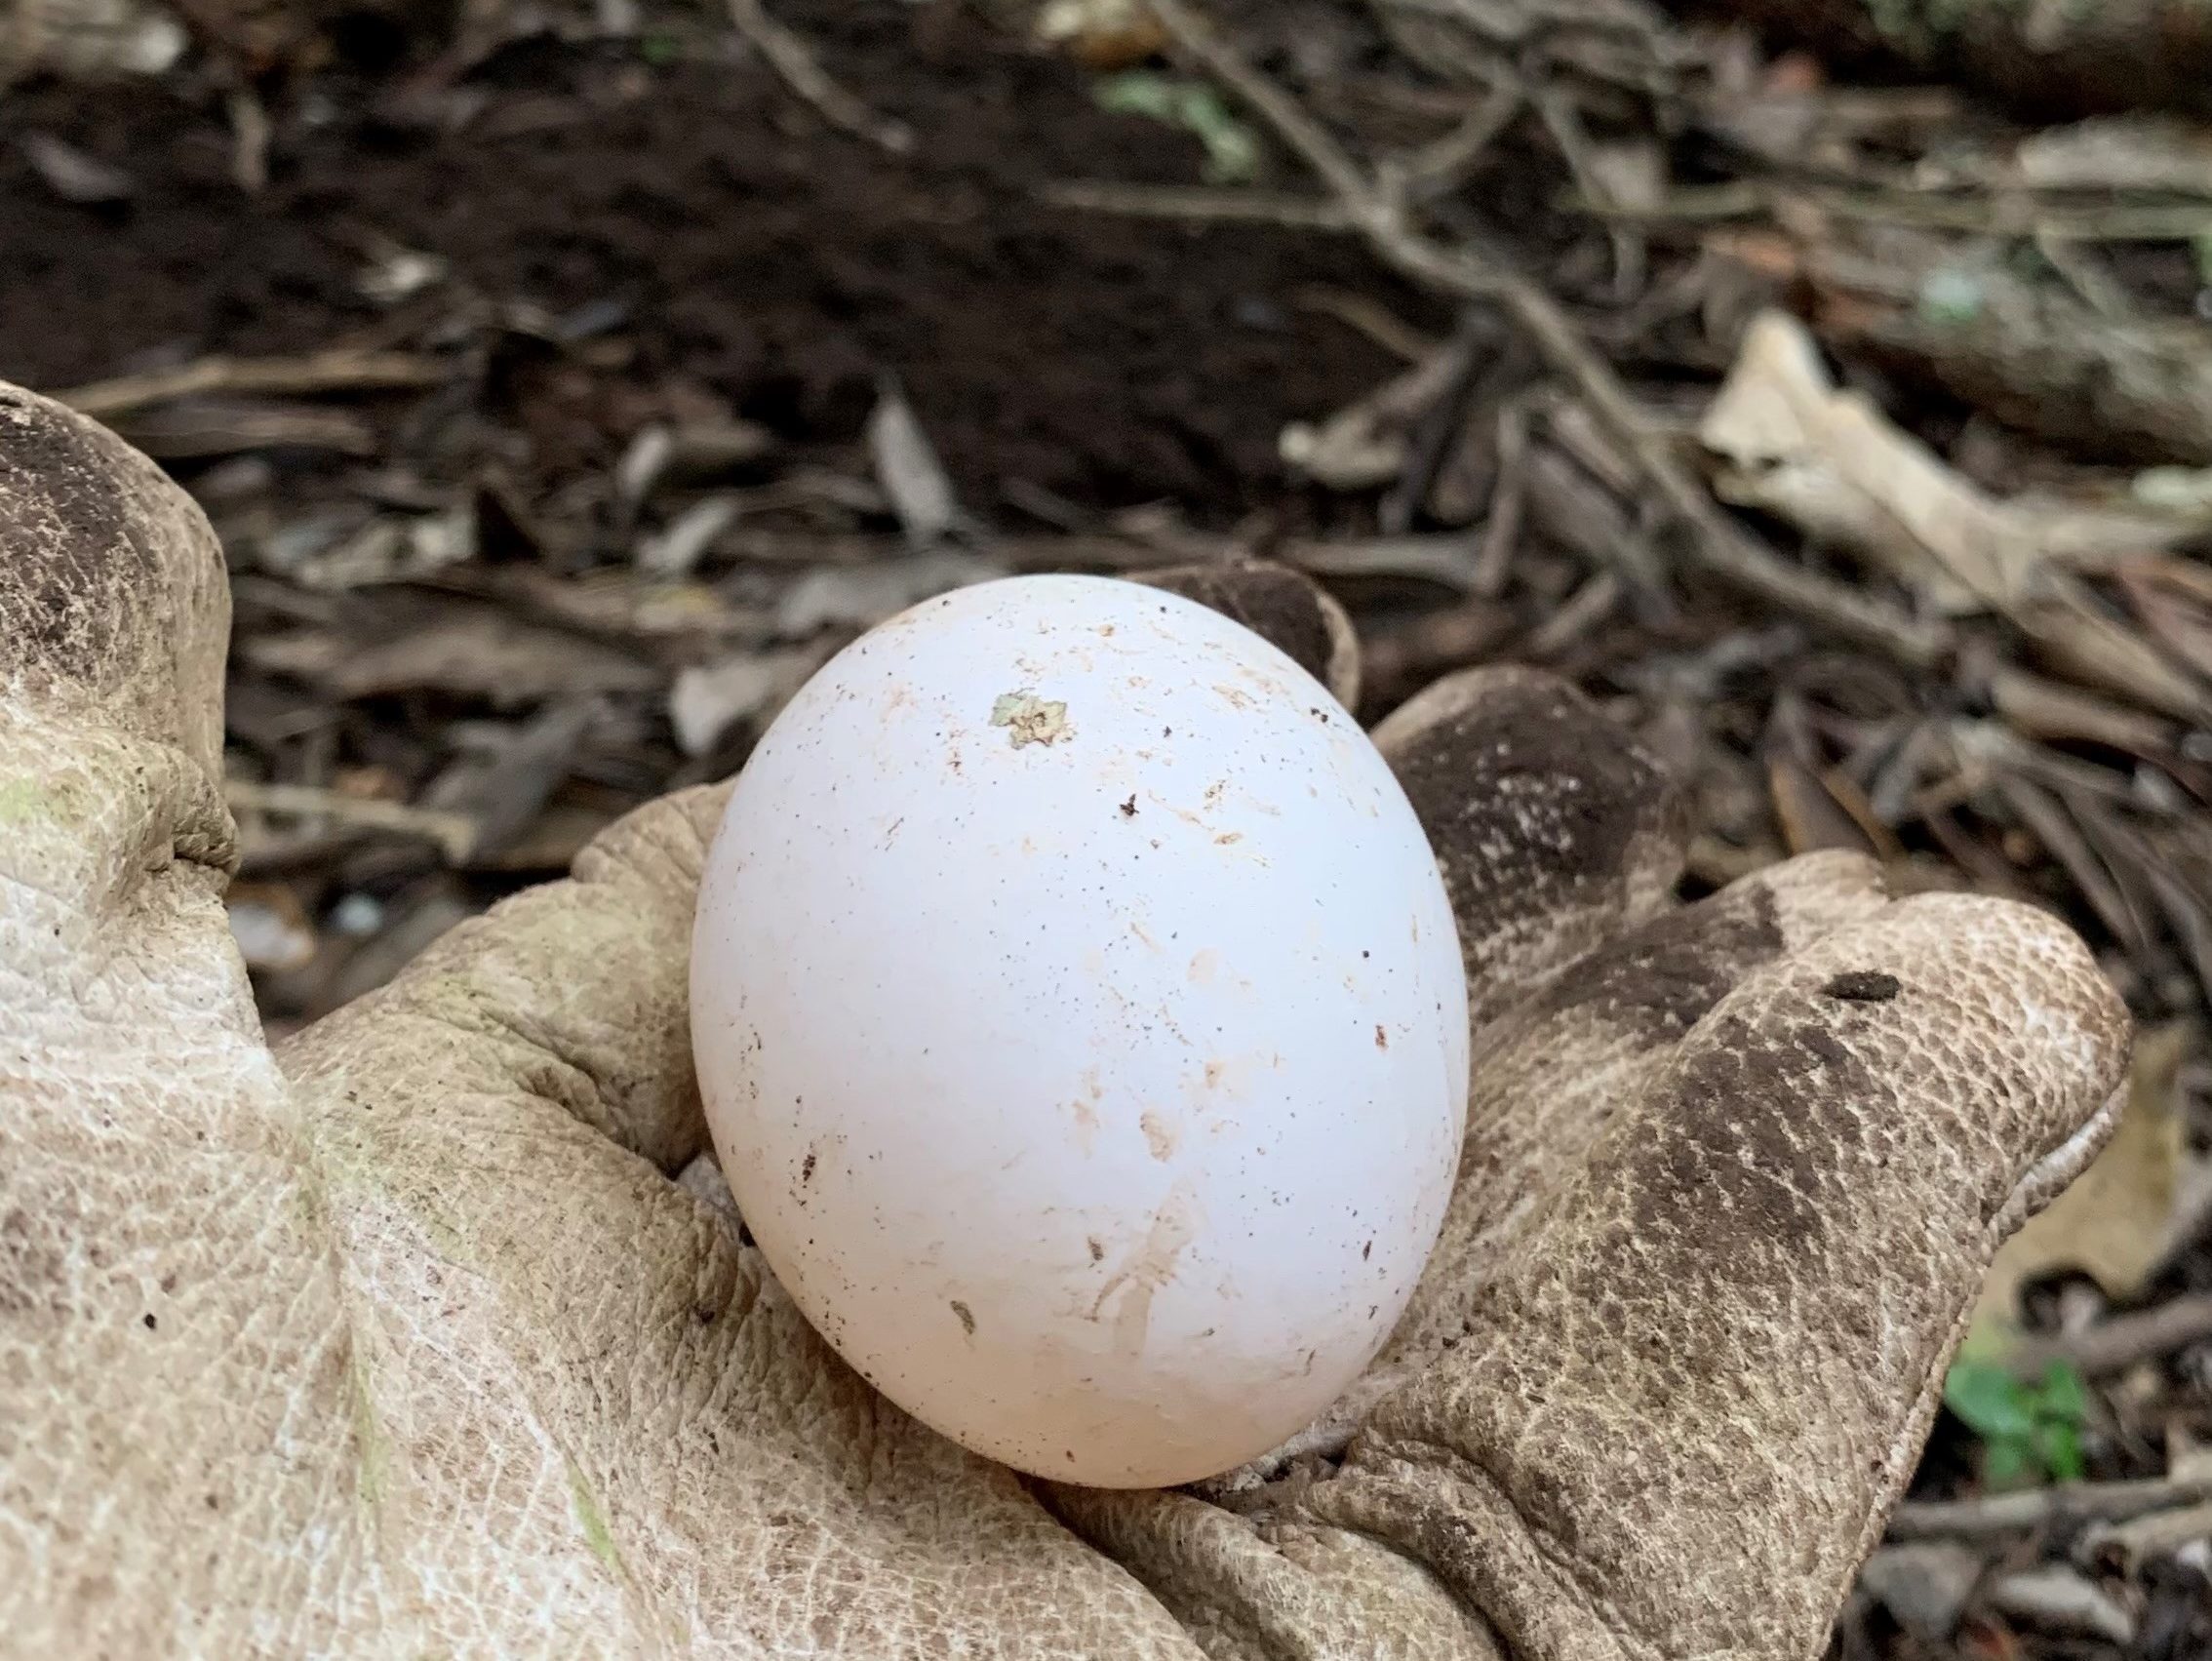 A toanui egg in a gloved hand.